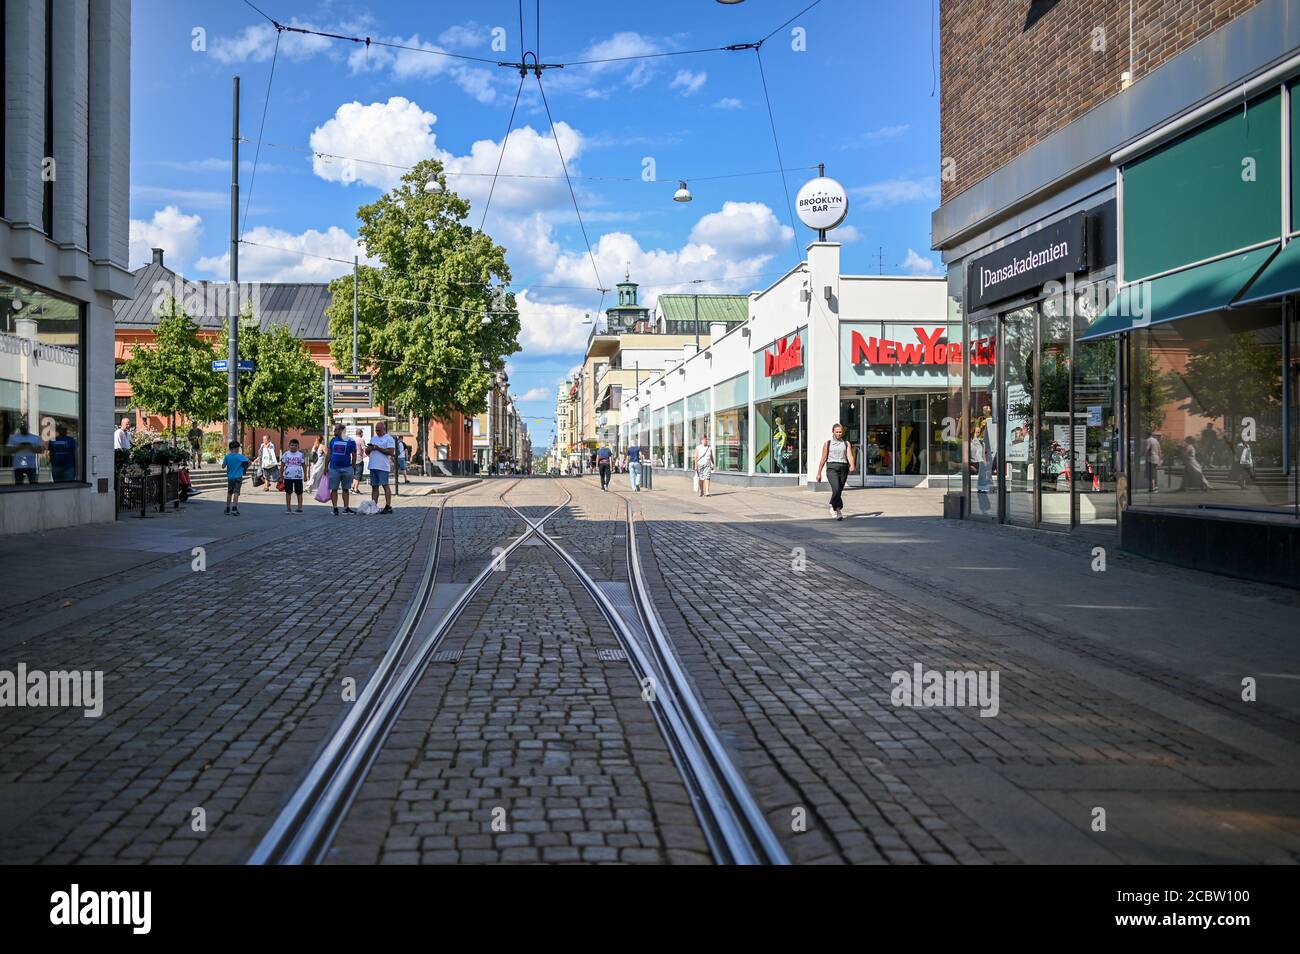 Tram tracks on Drottningatan in the city center of Norrkoping, Sweden. This is the main street in historic industrial town Norrkoping. Stock Photo